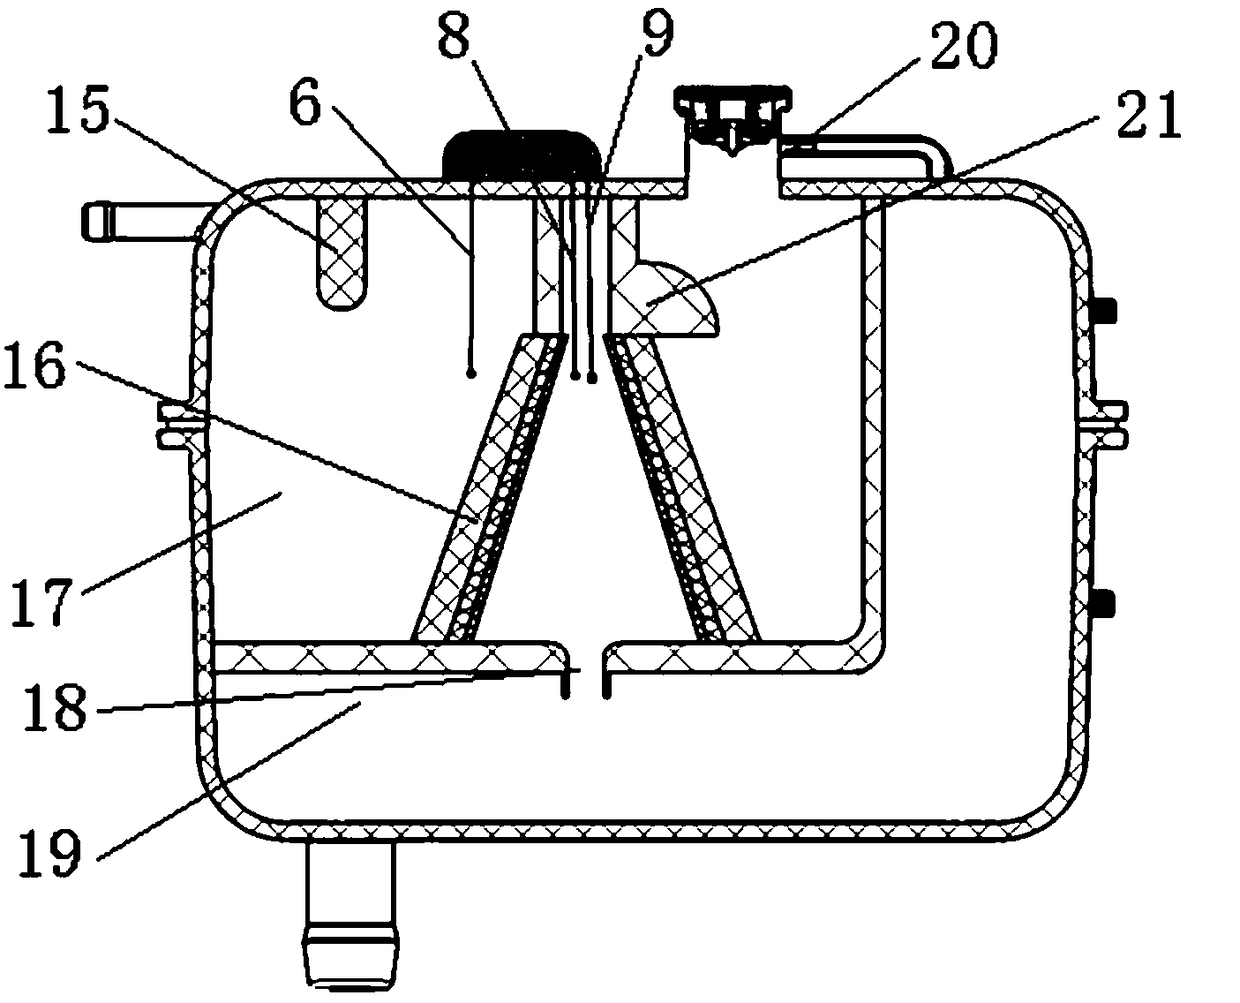 An expansion kettle and its processing method